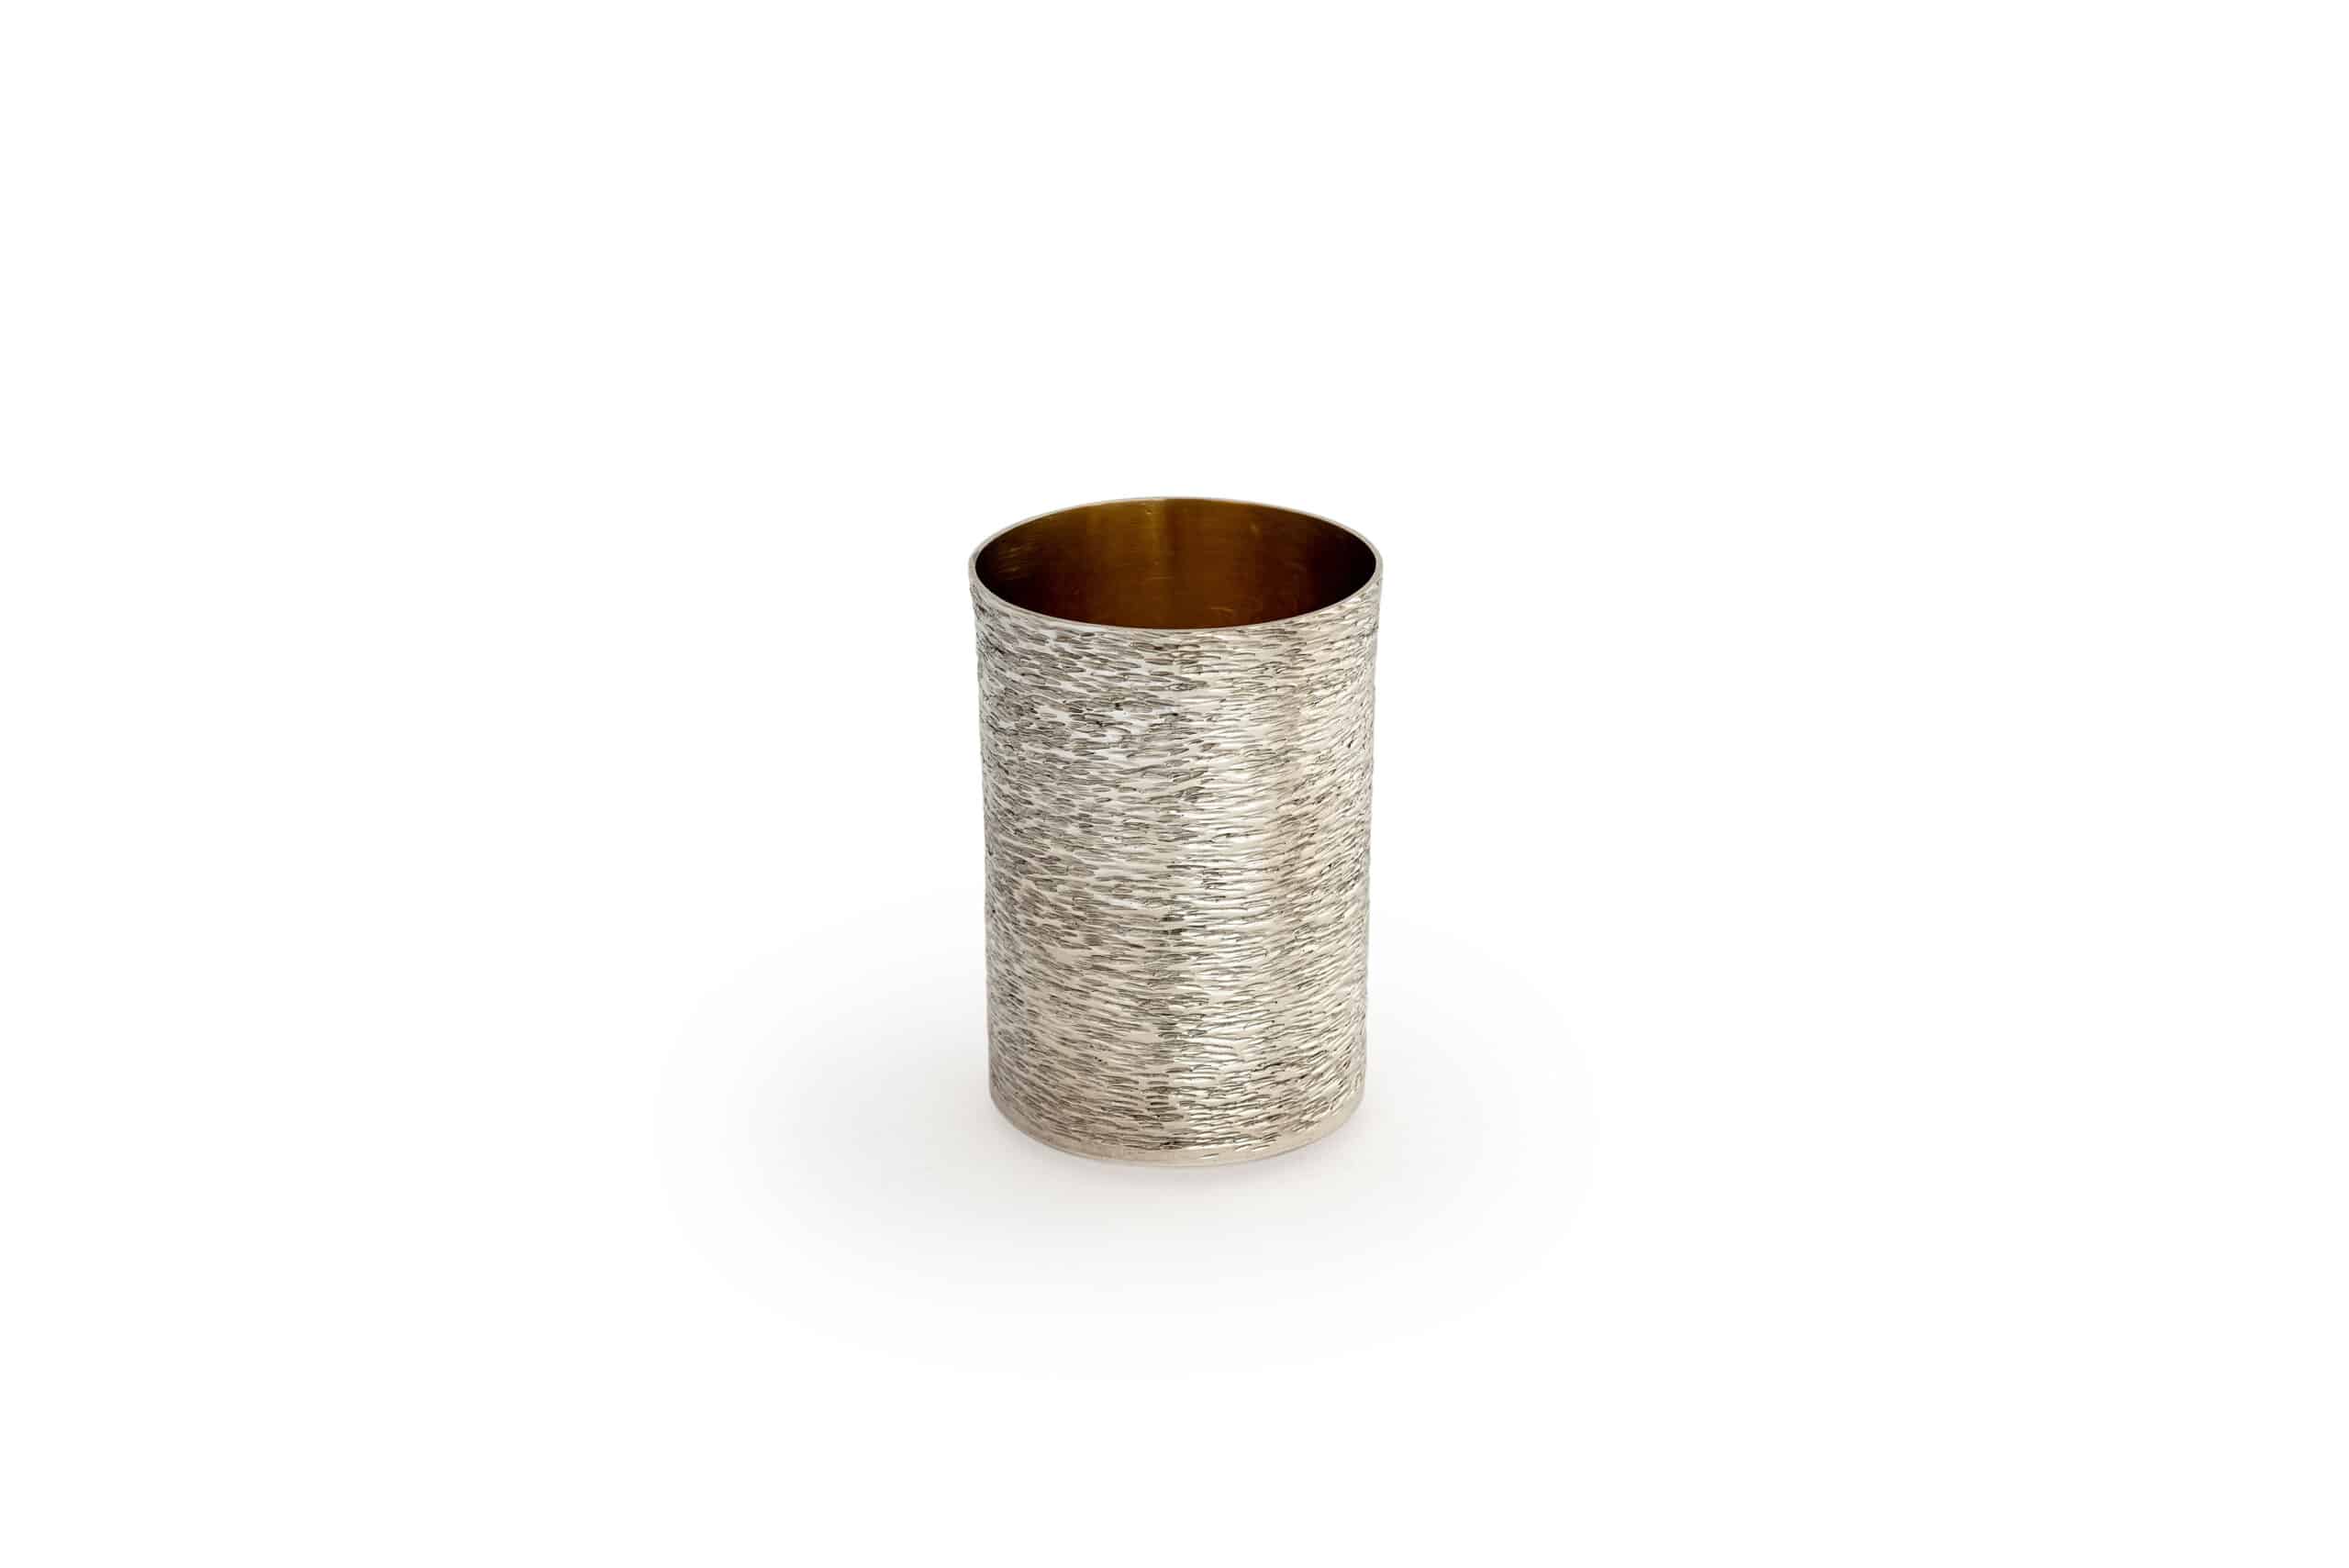 Modern 925 Sterling Silver Liquor Cup With Hammered Finish